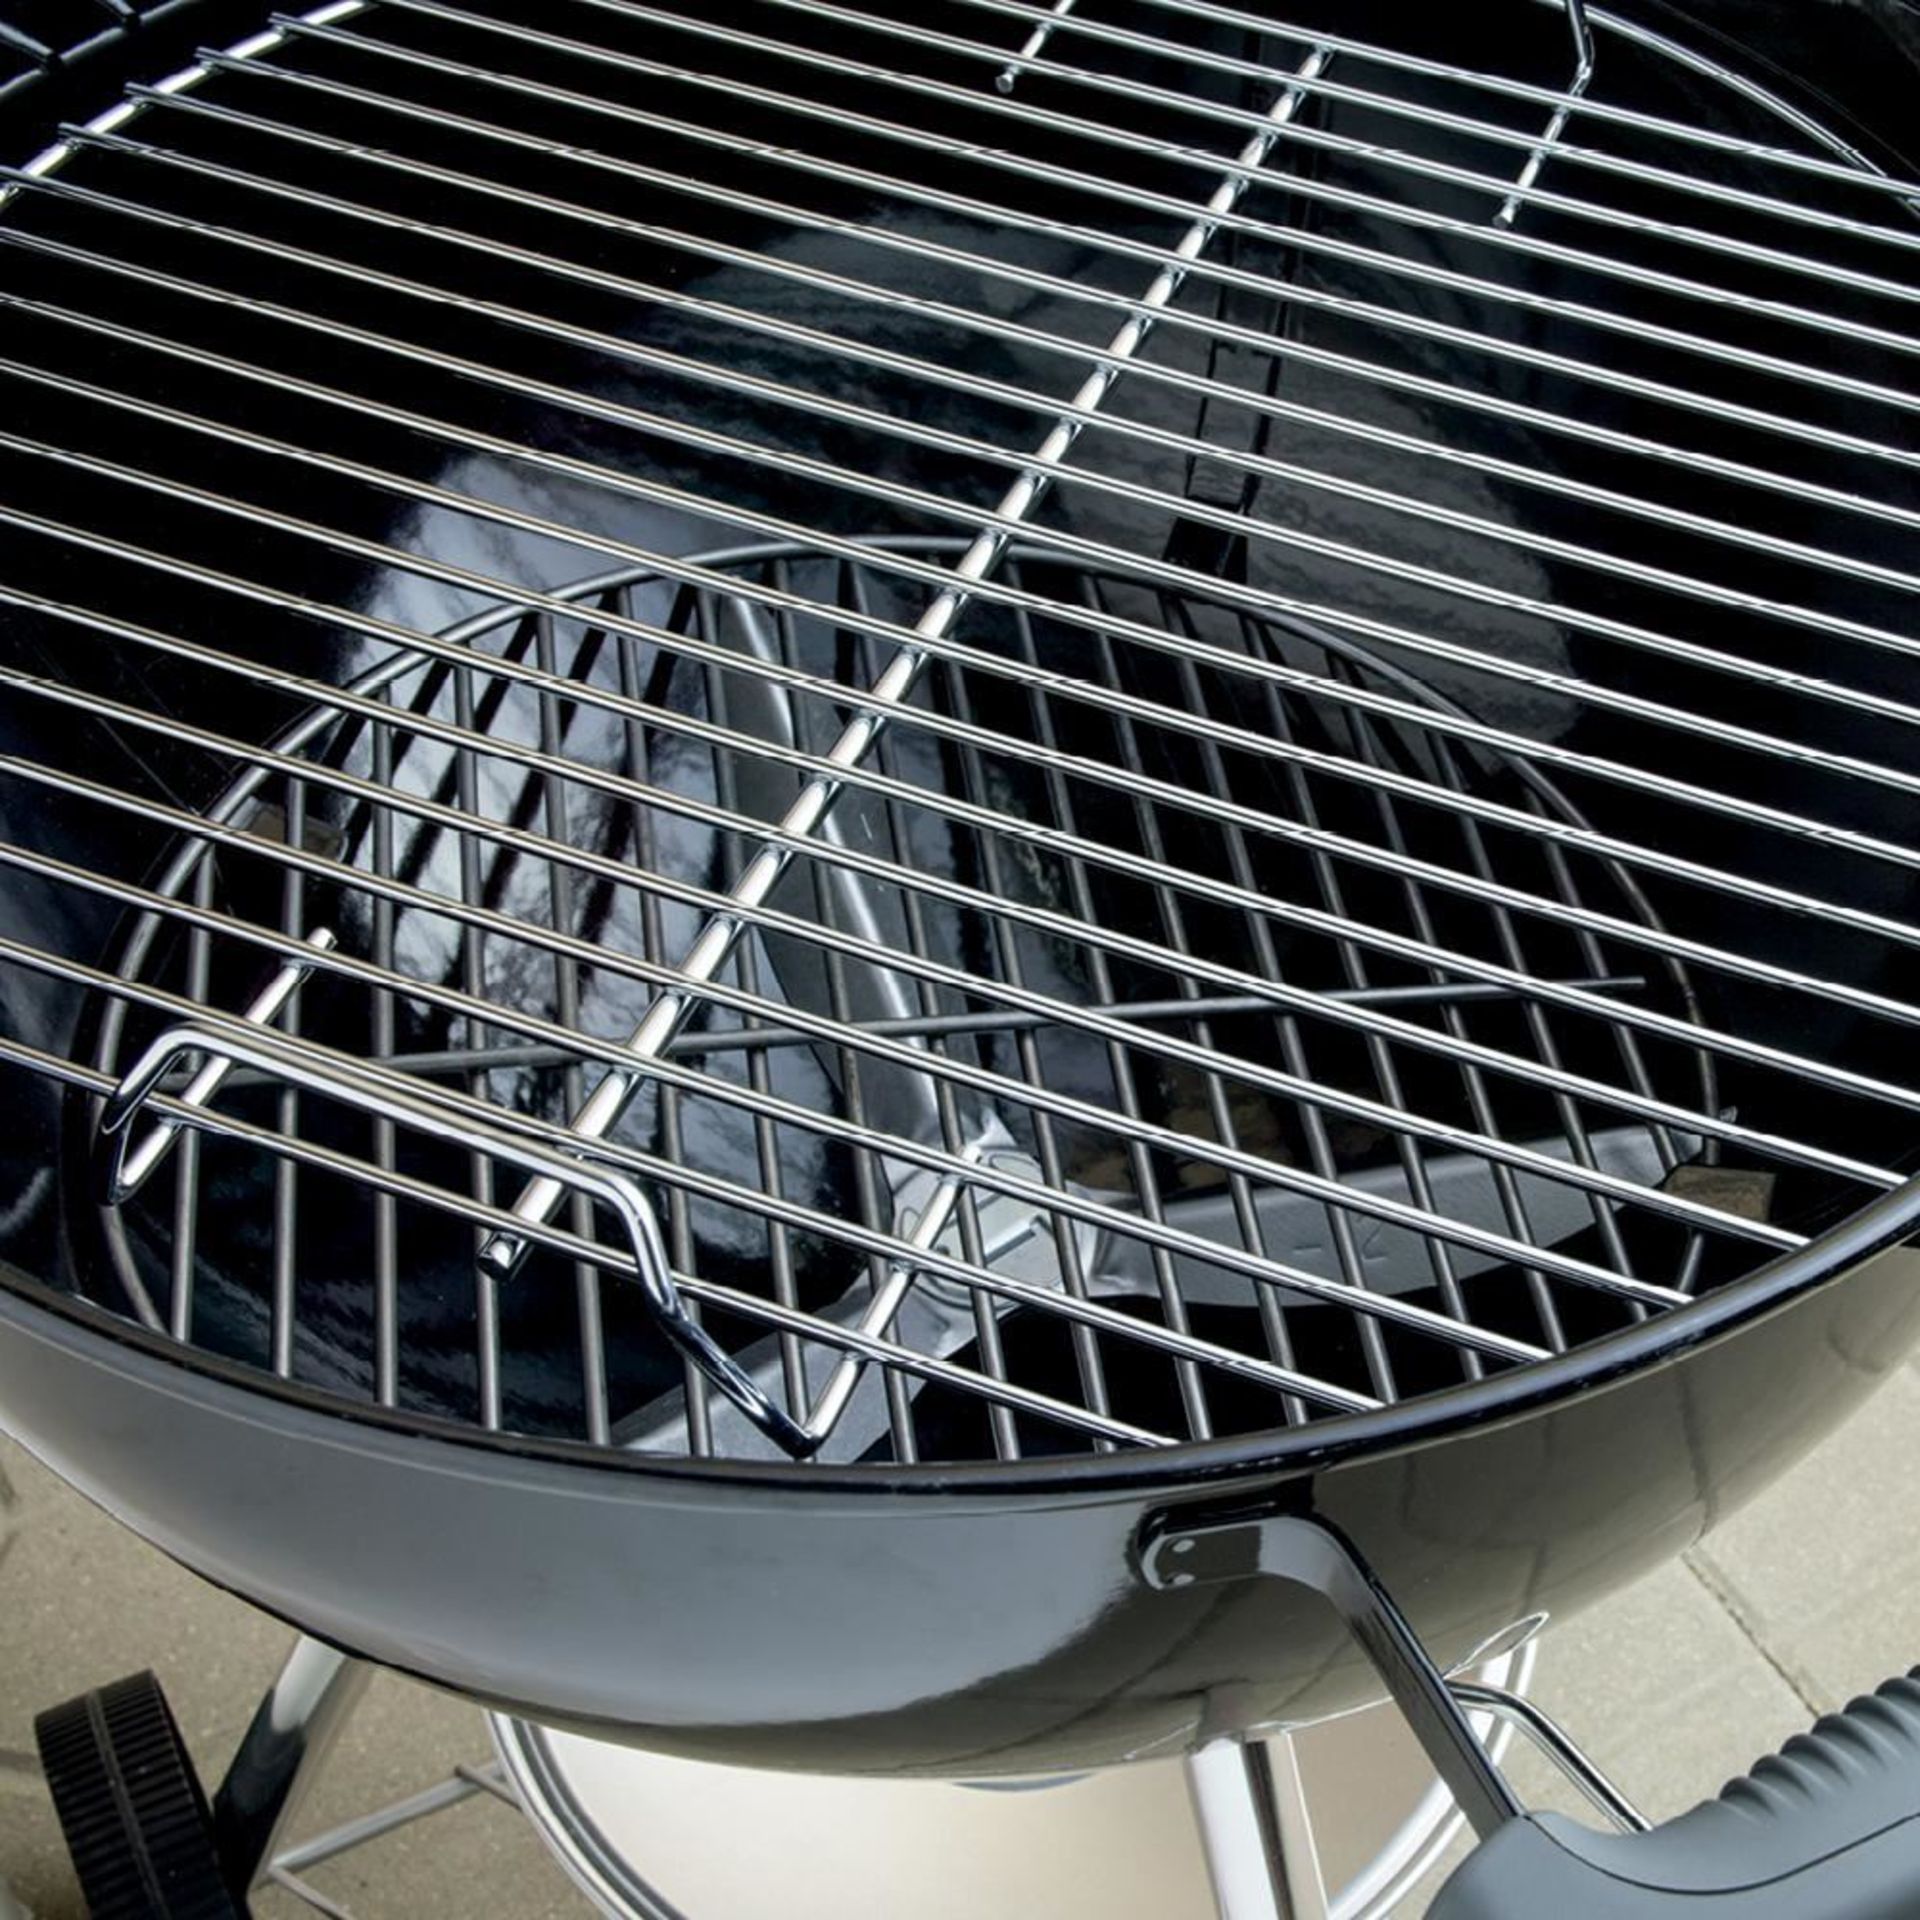 Weber 22 inch Original Kettle Charcoal Grill in Black - Image 2 of 3